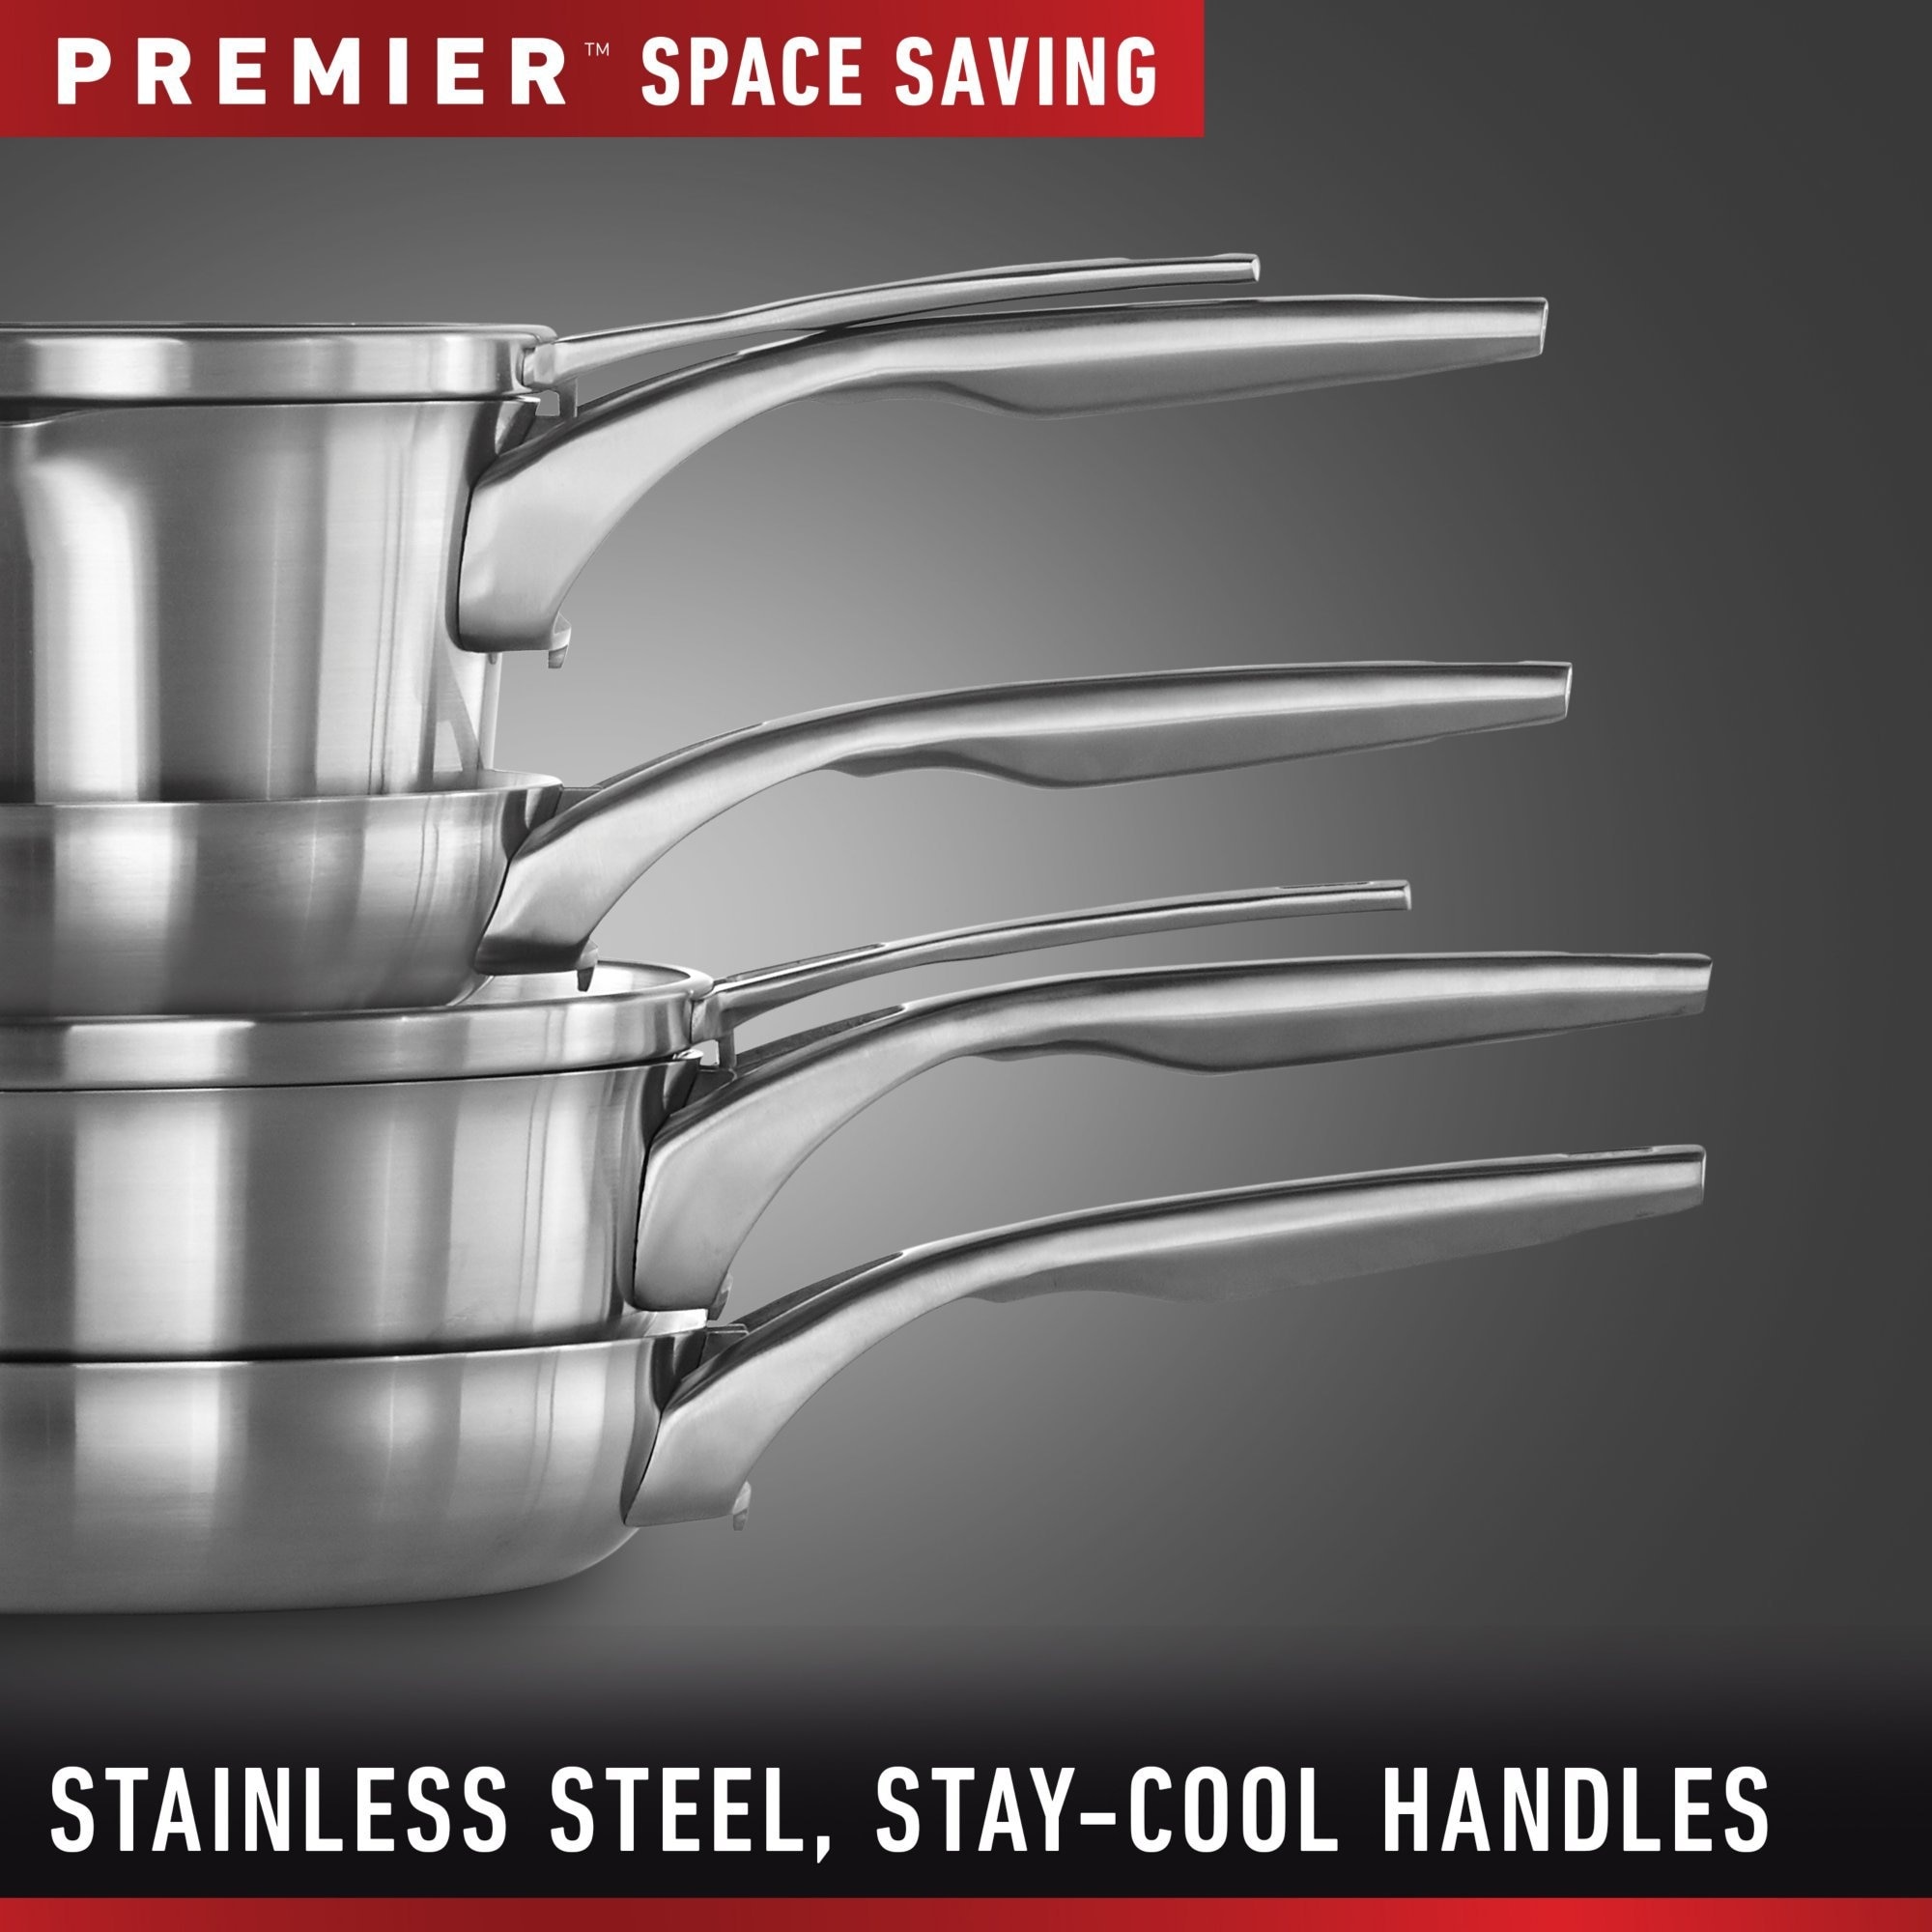 https://ak1.ostkcdn.com/images/products/is/images/direct/aea5337d5a58f1c6e1ce2532ad10e6934ee4886e/Calphalon-Premier-Space-Saving-Stainless-Steel-10-Piece-Cookware-Set.jpg